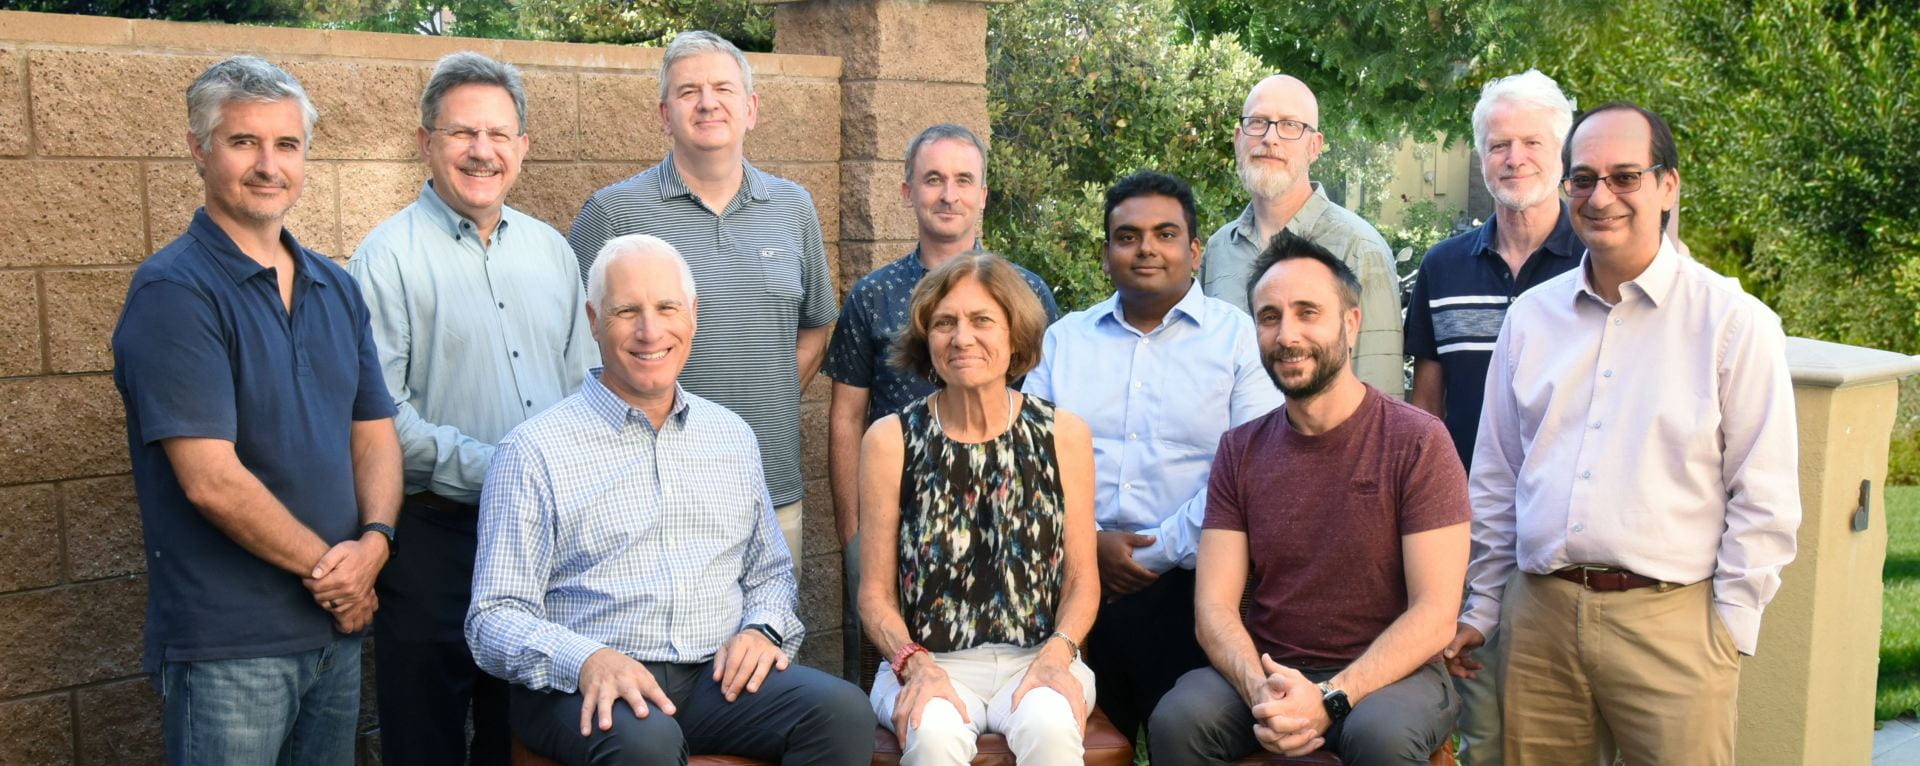 The UCI research team is directed by (seated, from left) Frank LaFerla, Andrea Tenner and Kim Green. Other investigators include (standing, from left) Marcelo Wood, Arthur Lander, Grant MacGregor, Ian Smith, Vivek Swarup, Craig Stark, Andre Obenaus and Ali Mortazavi.